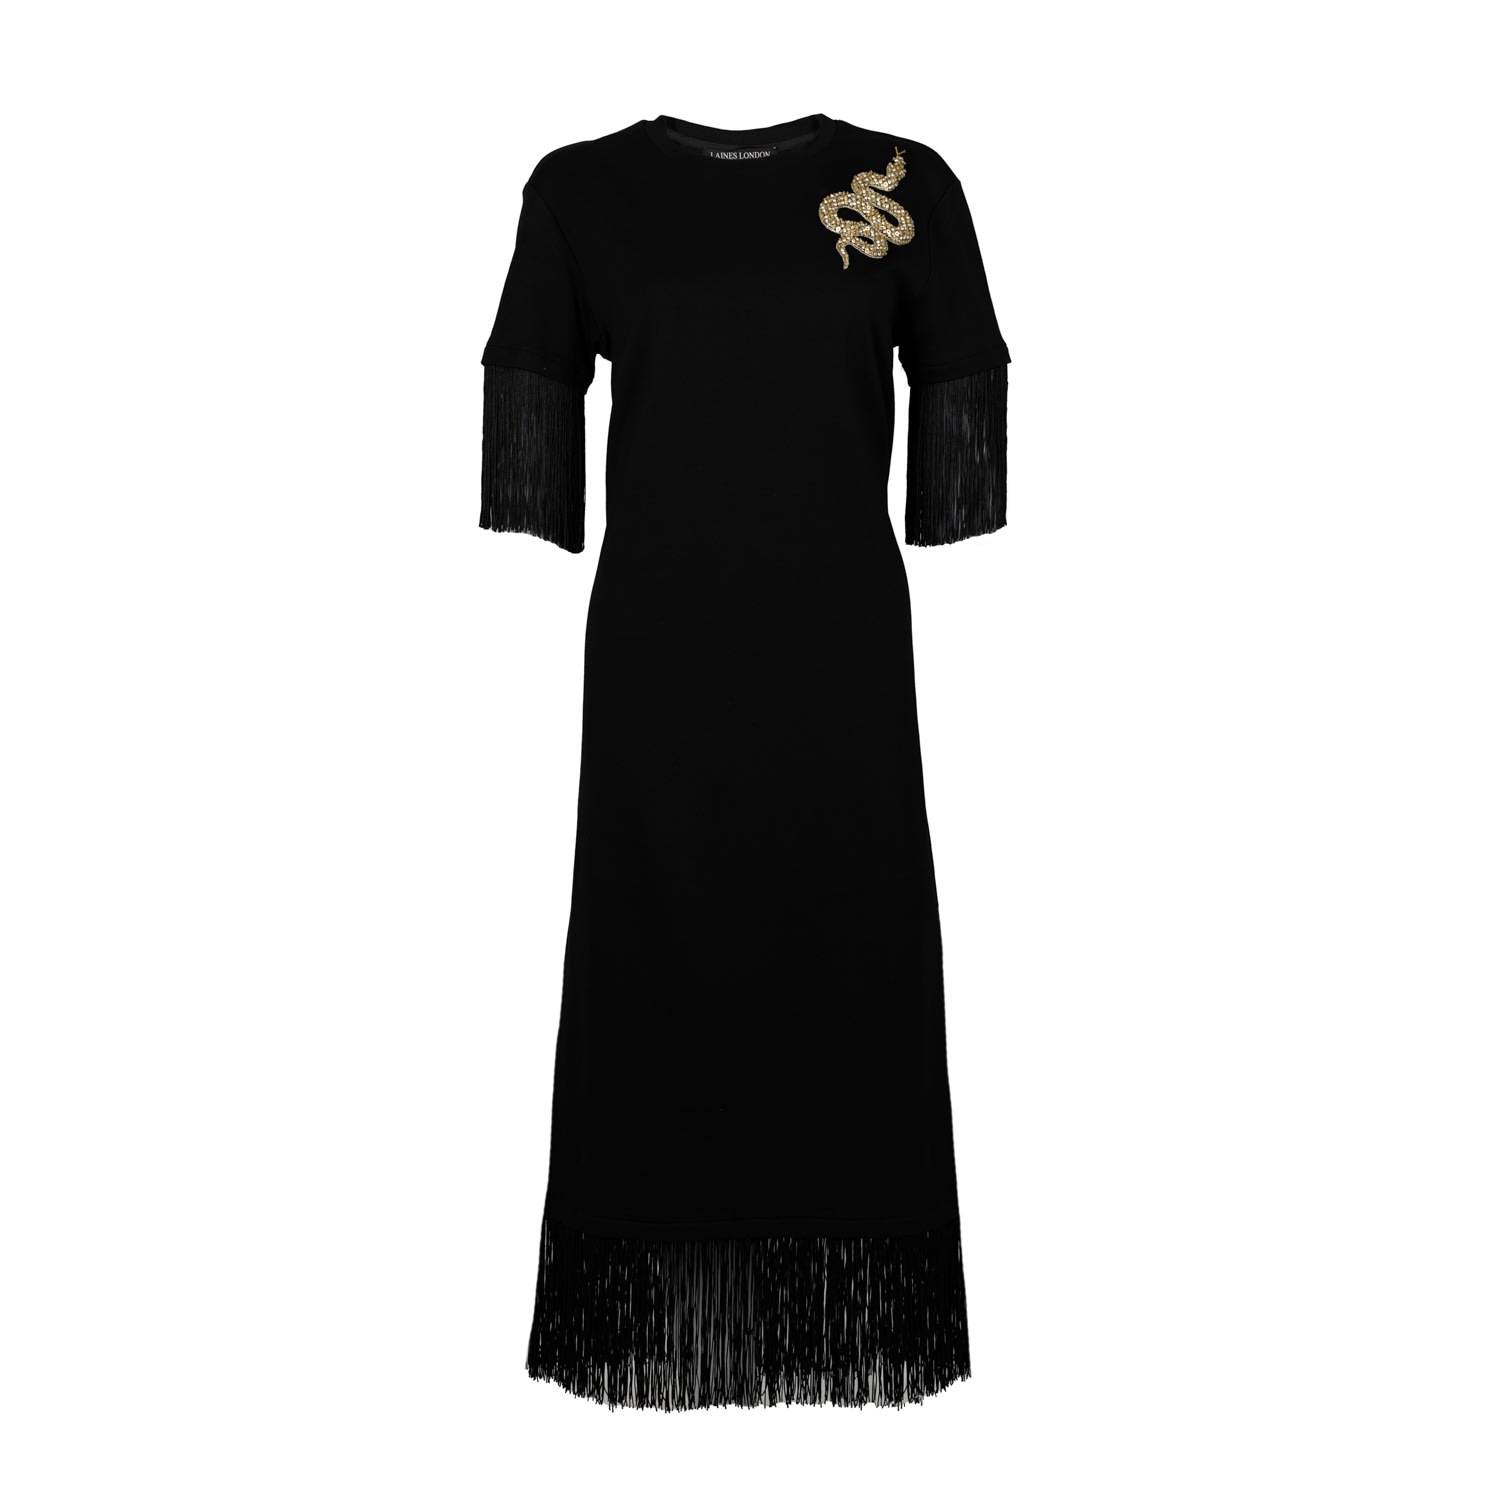 Women’s Laines Couture Fringed Tassel Dress With Embellished Snake - Black L/Xl Laines London